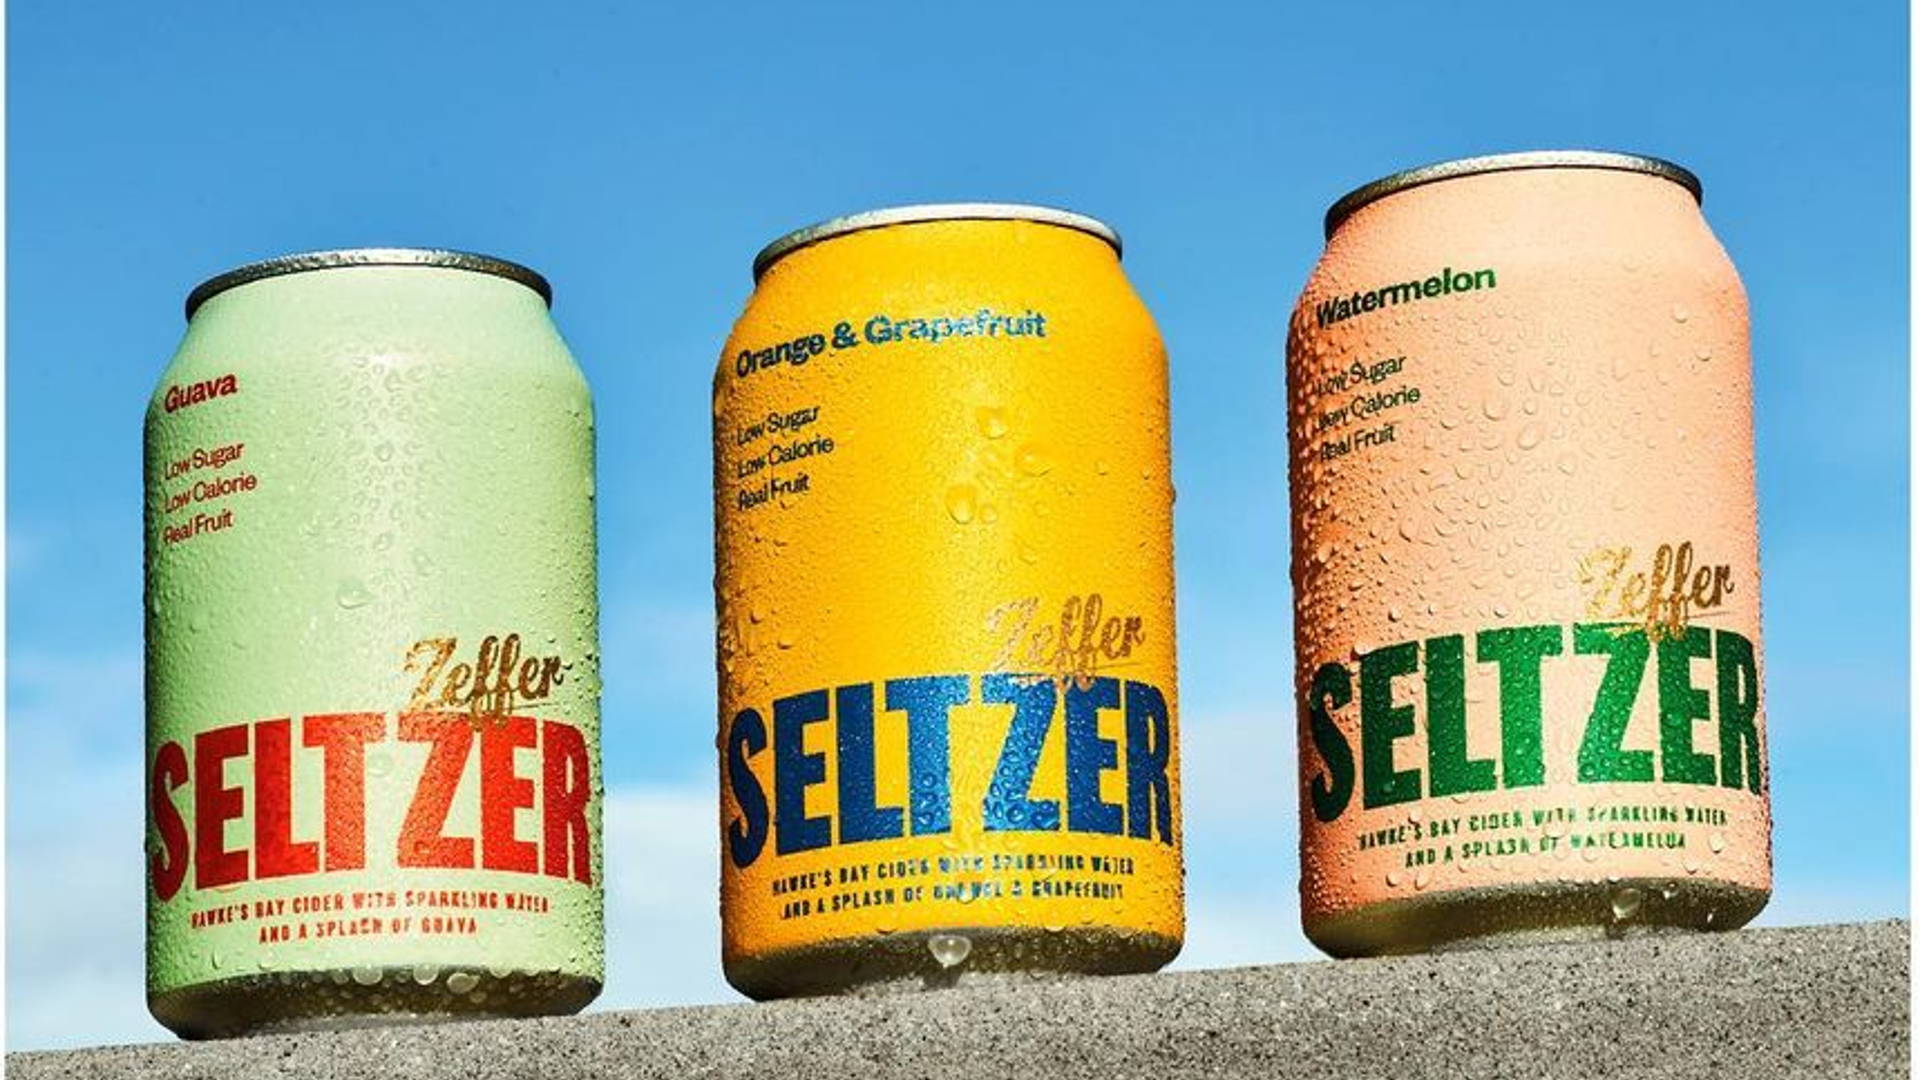 Featured image for Zeffer New Zealand’s Cider Based Seltzer Is Crisp In More Ways Than One